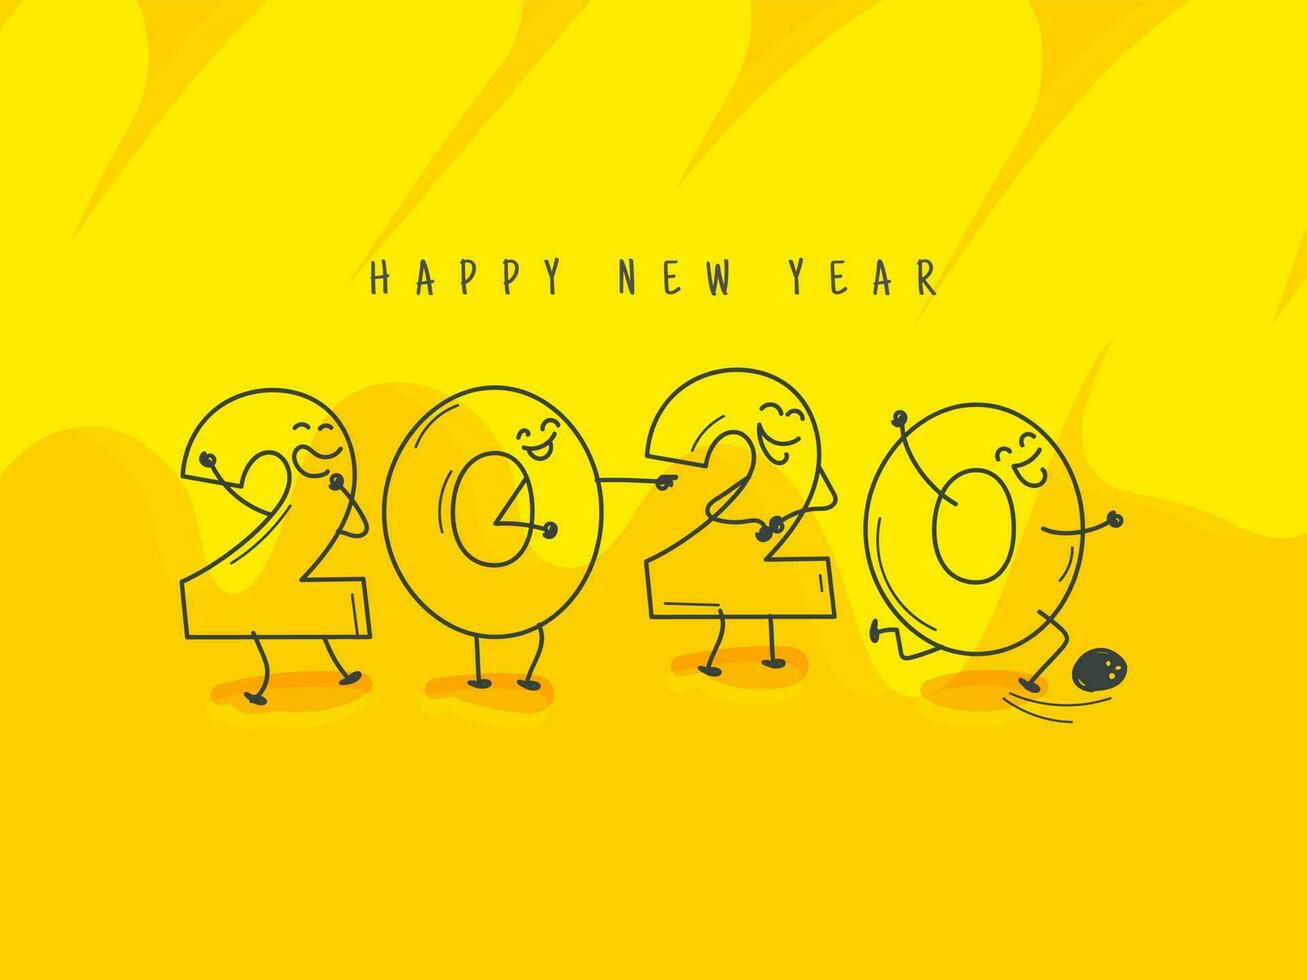 Funny cartoon number of 2020 on yellow background for Happy New Year celebration. Can be used as greeting card design. vector